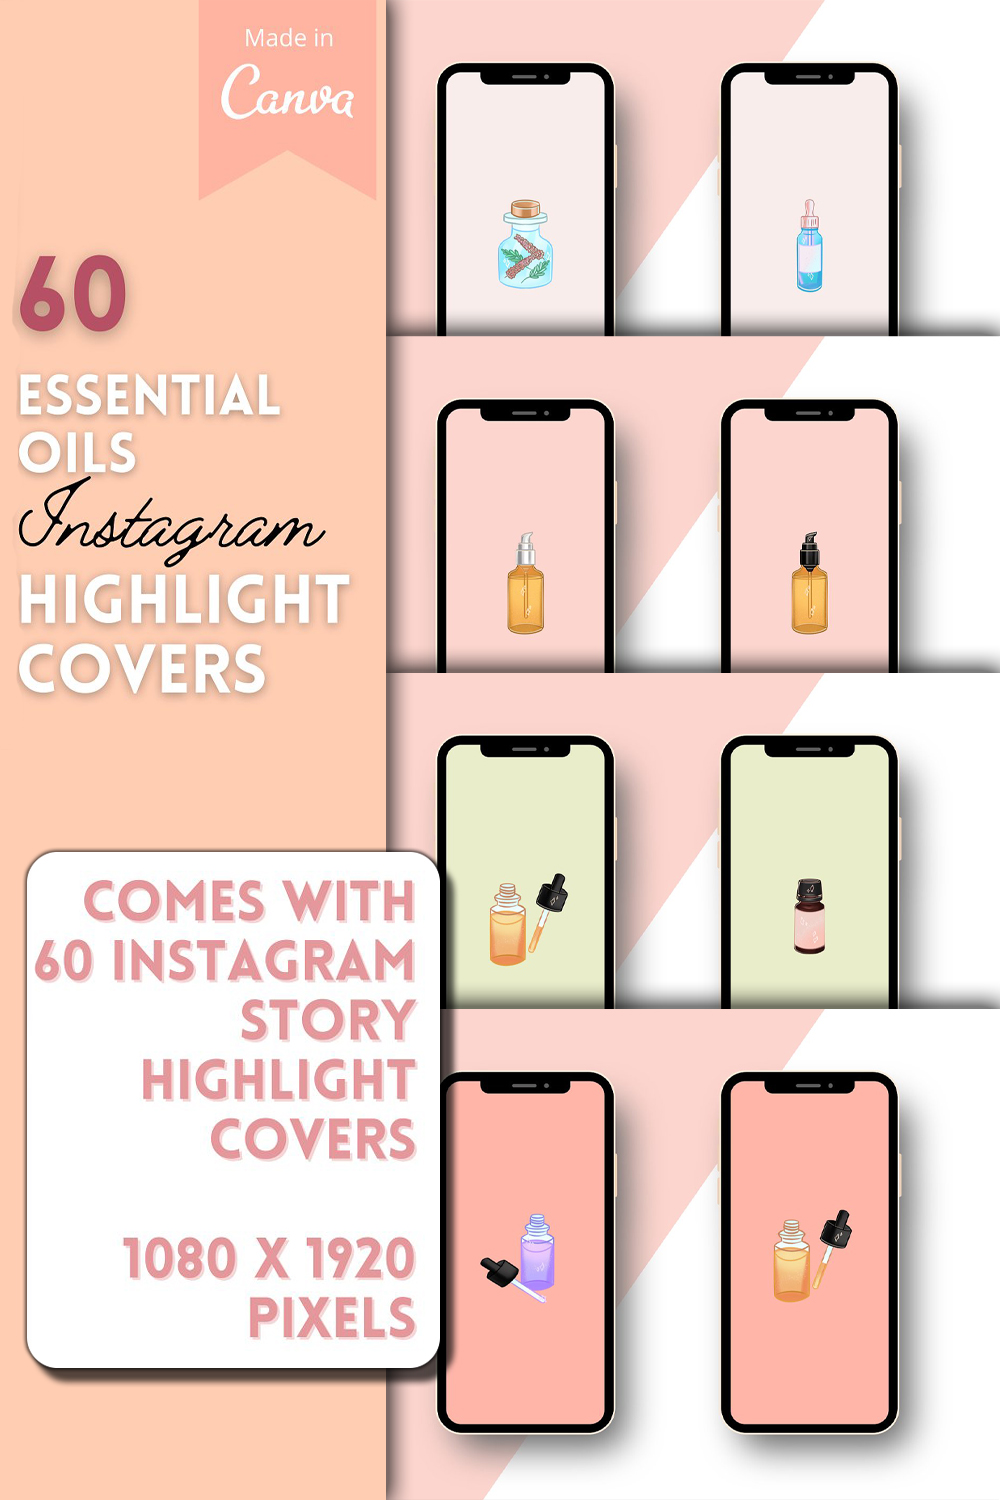 Essential oils ig highlight covers of pinterest.